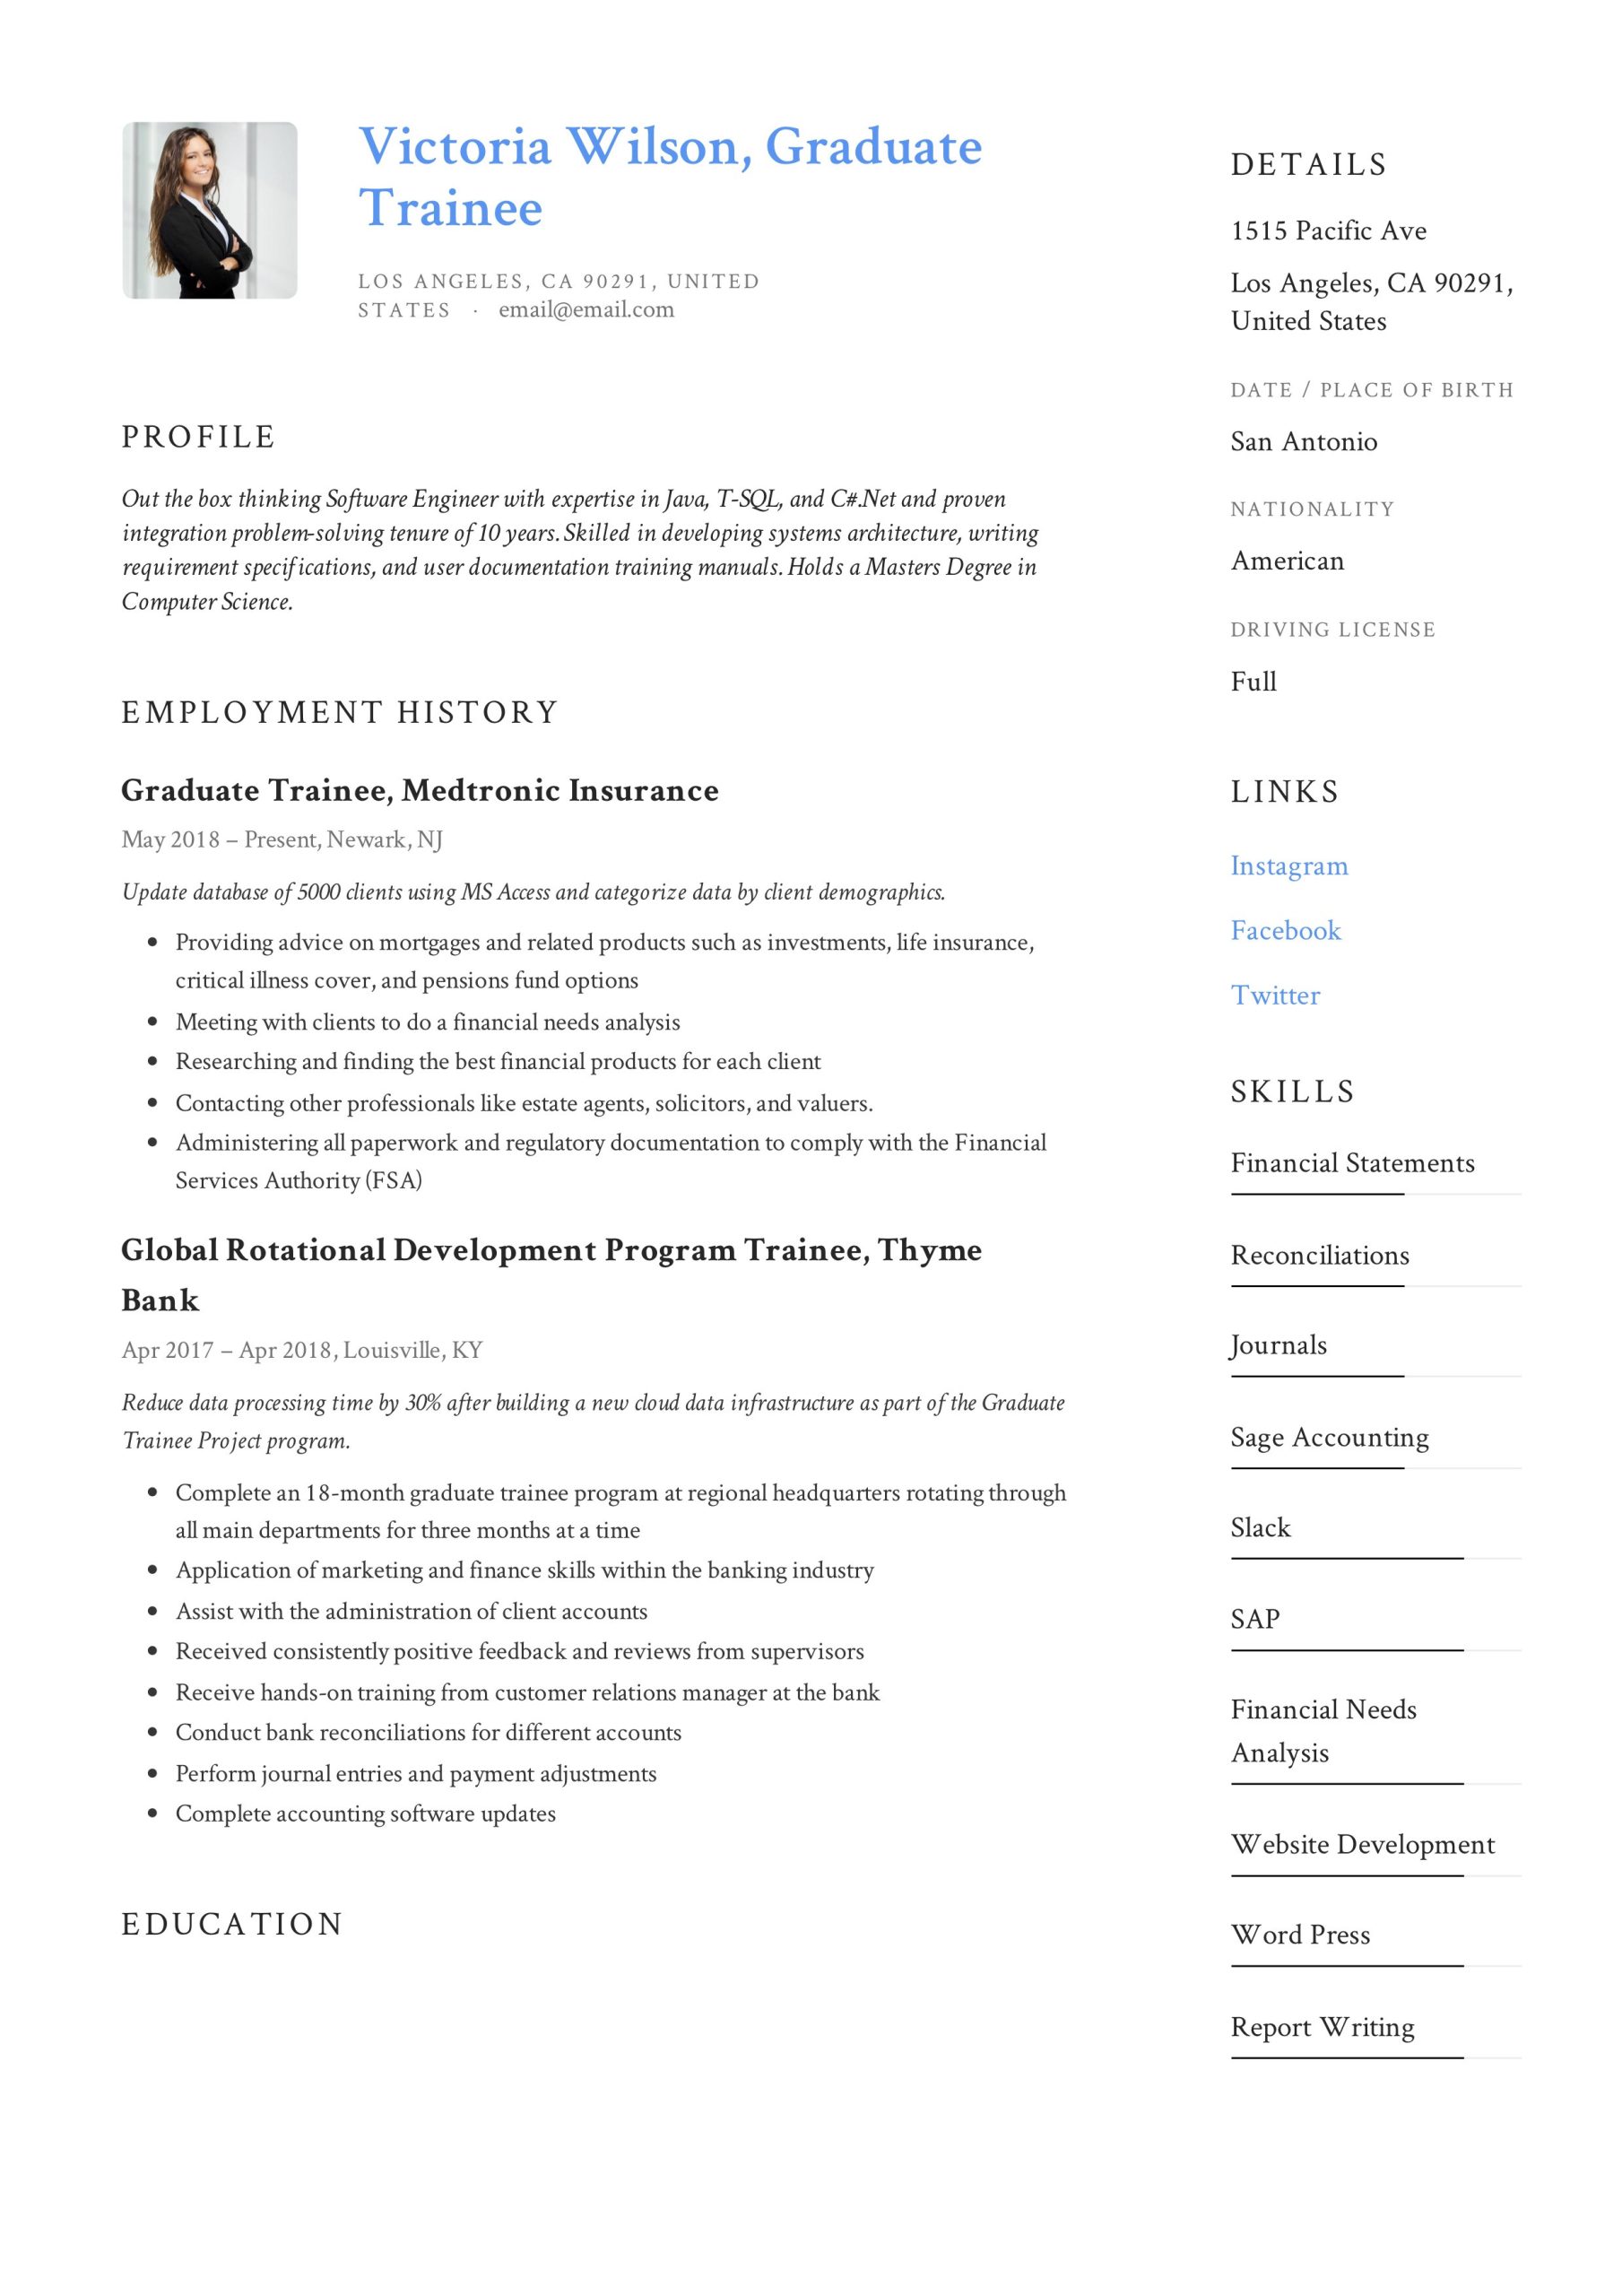 Sample Resume Objectives for Masters Degree Graduate Trainee Resume & Writing Guide  12 Resume Examples Pdf